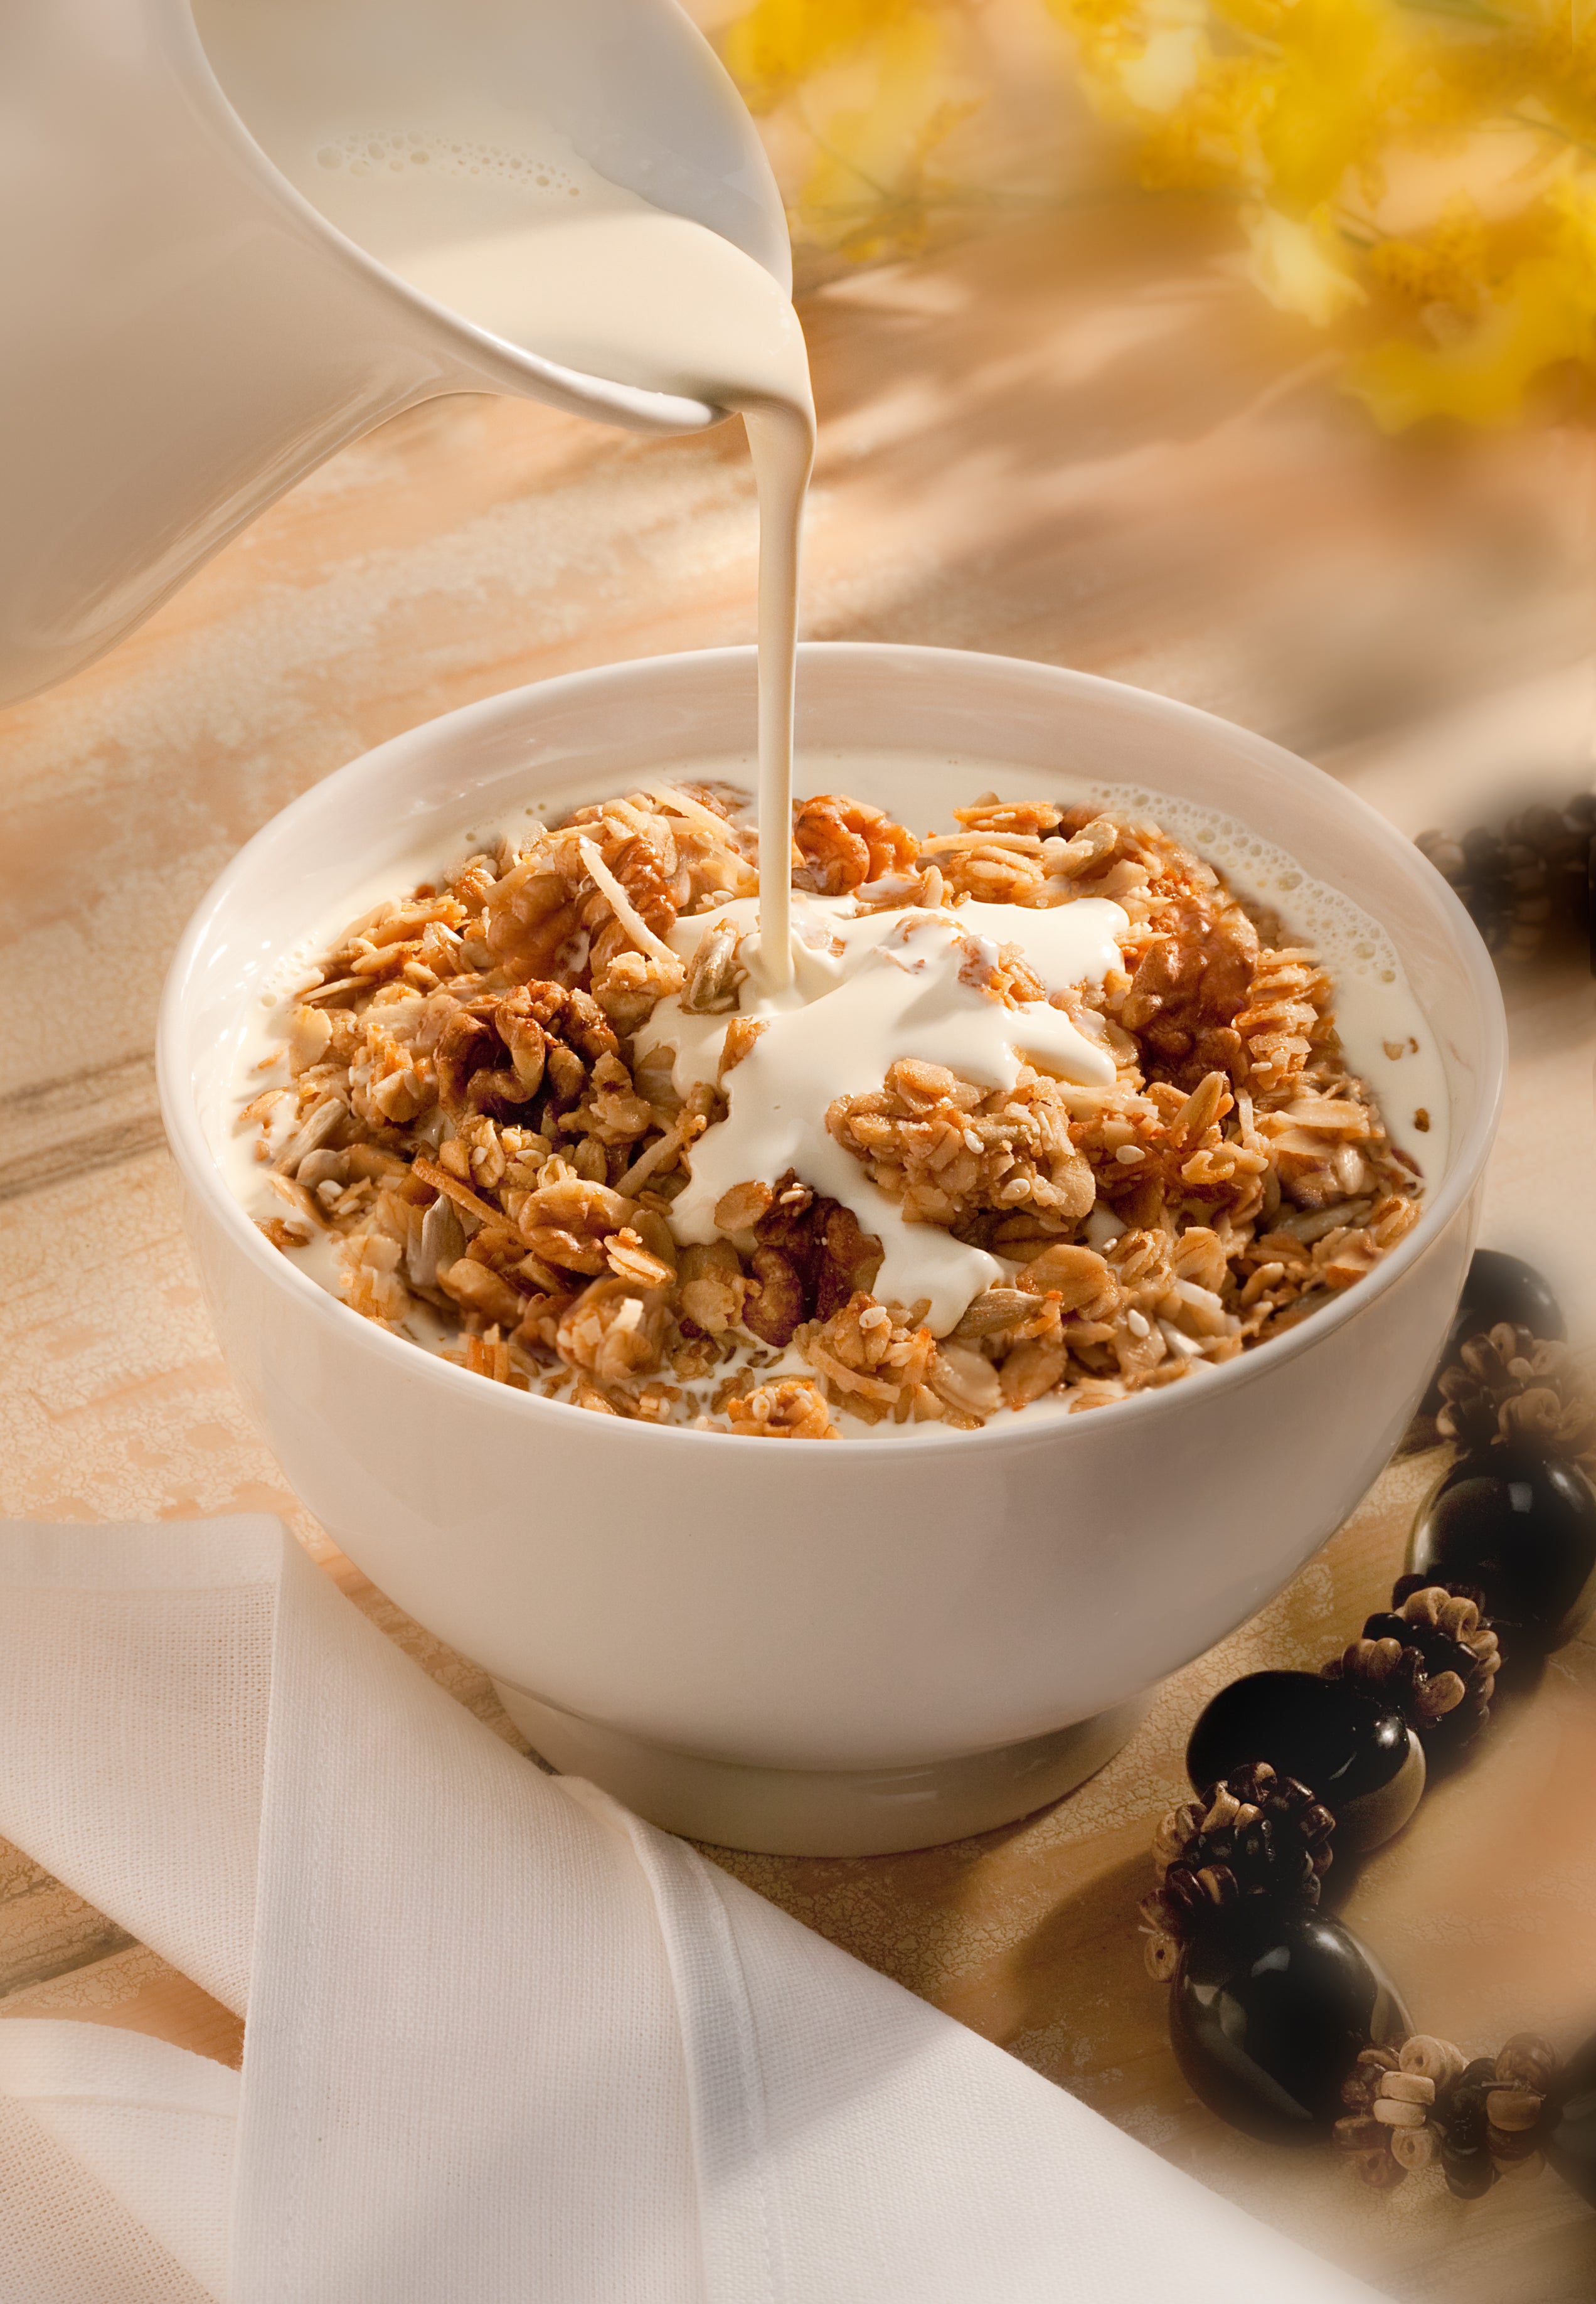 What is the shelf life of Anahola Granola?